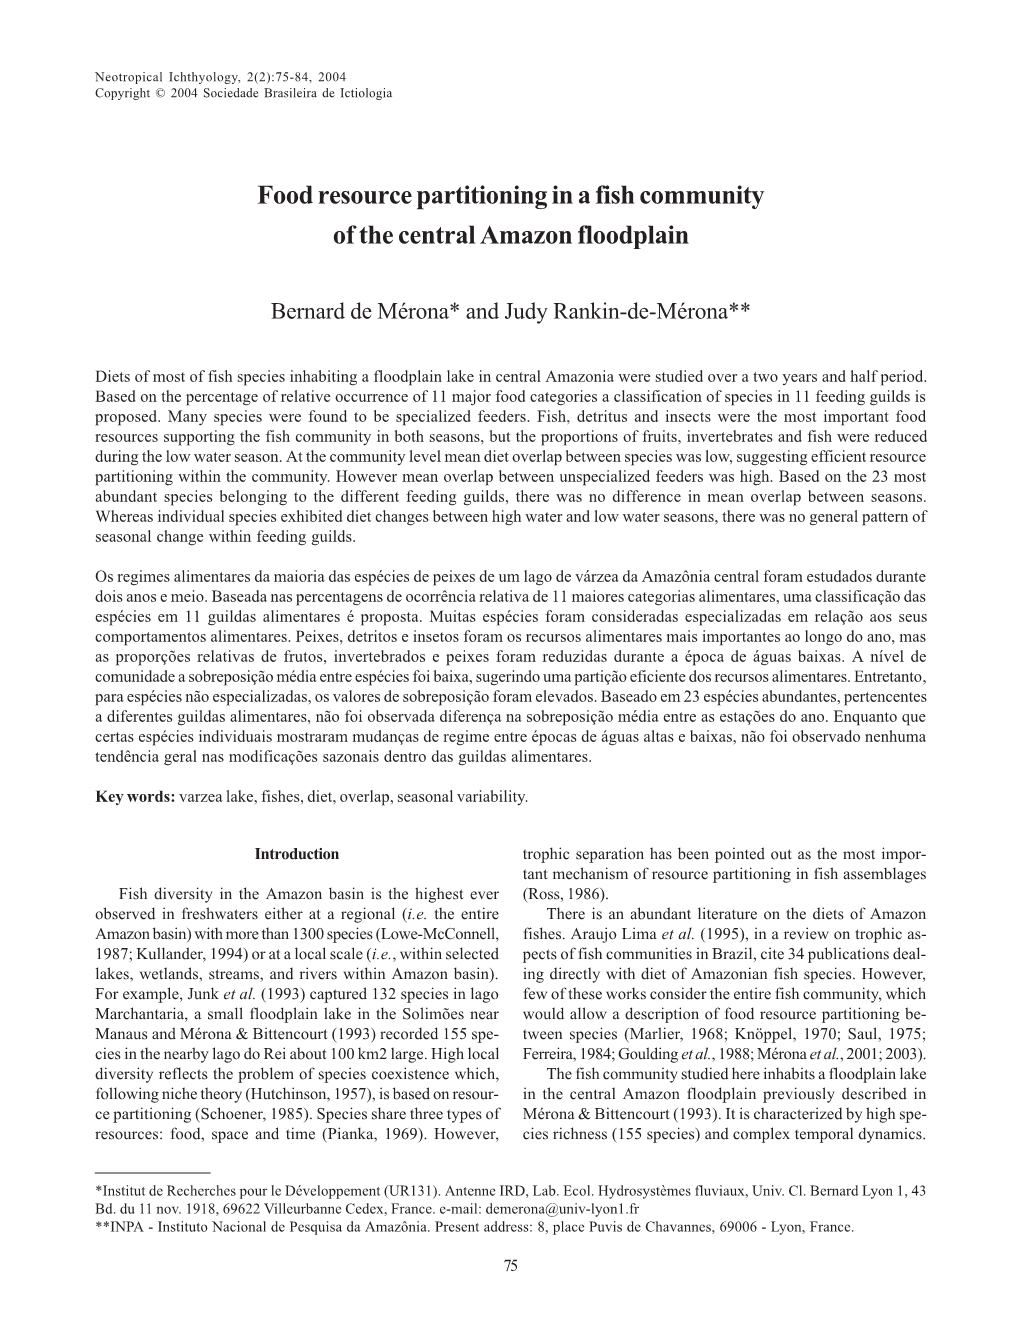 Food Resource Partitioning in a Fish Community of the Central Amazon Floodplain